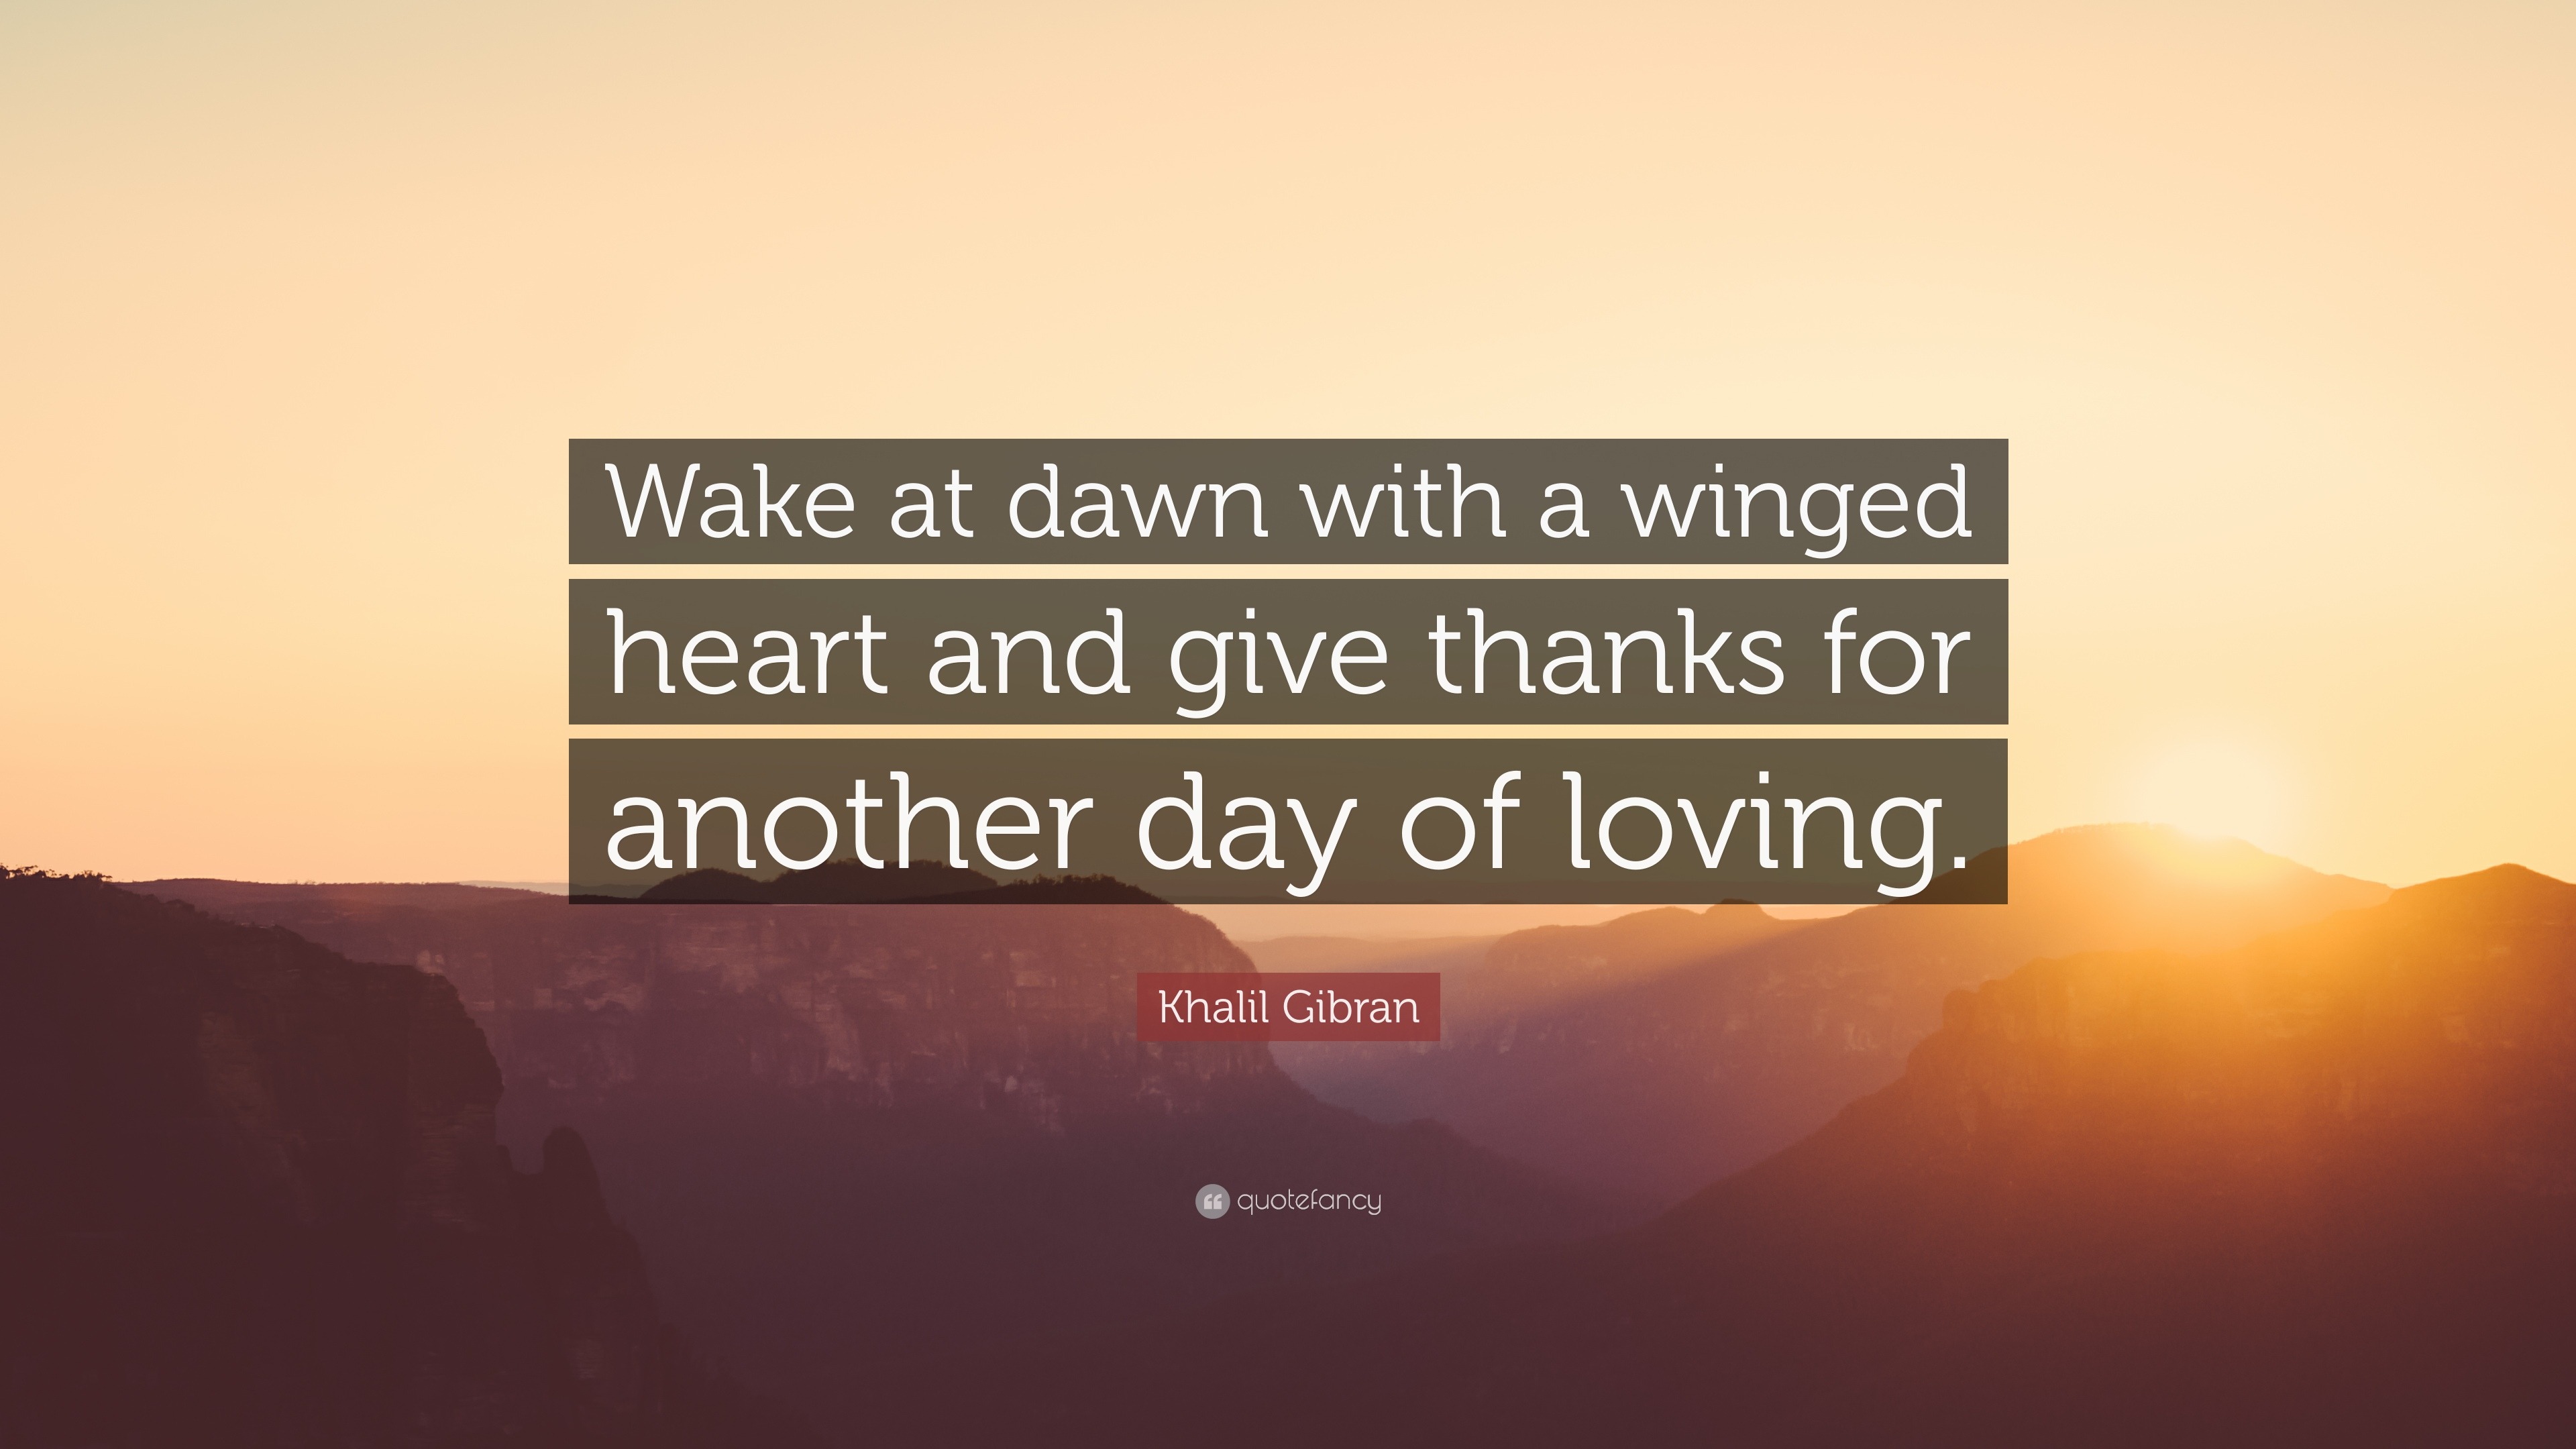 Khalil Gibran Quote: “Wake at dawn with a winged heart and give thanks ...